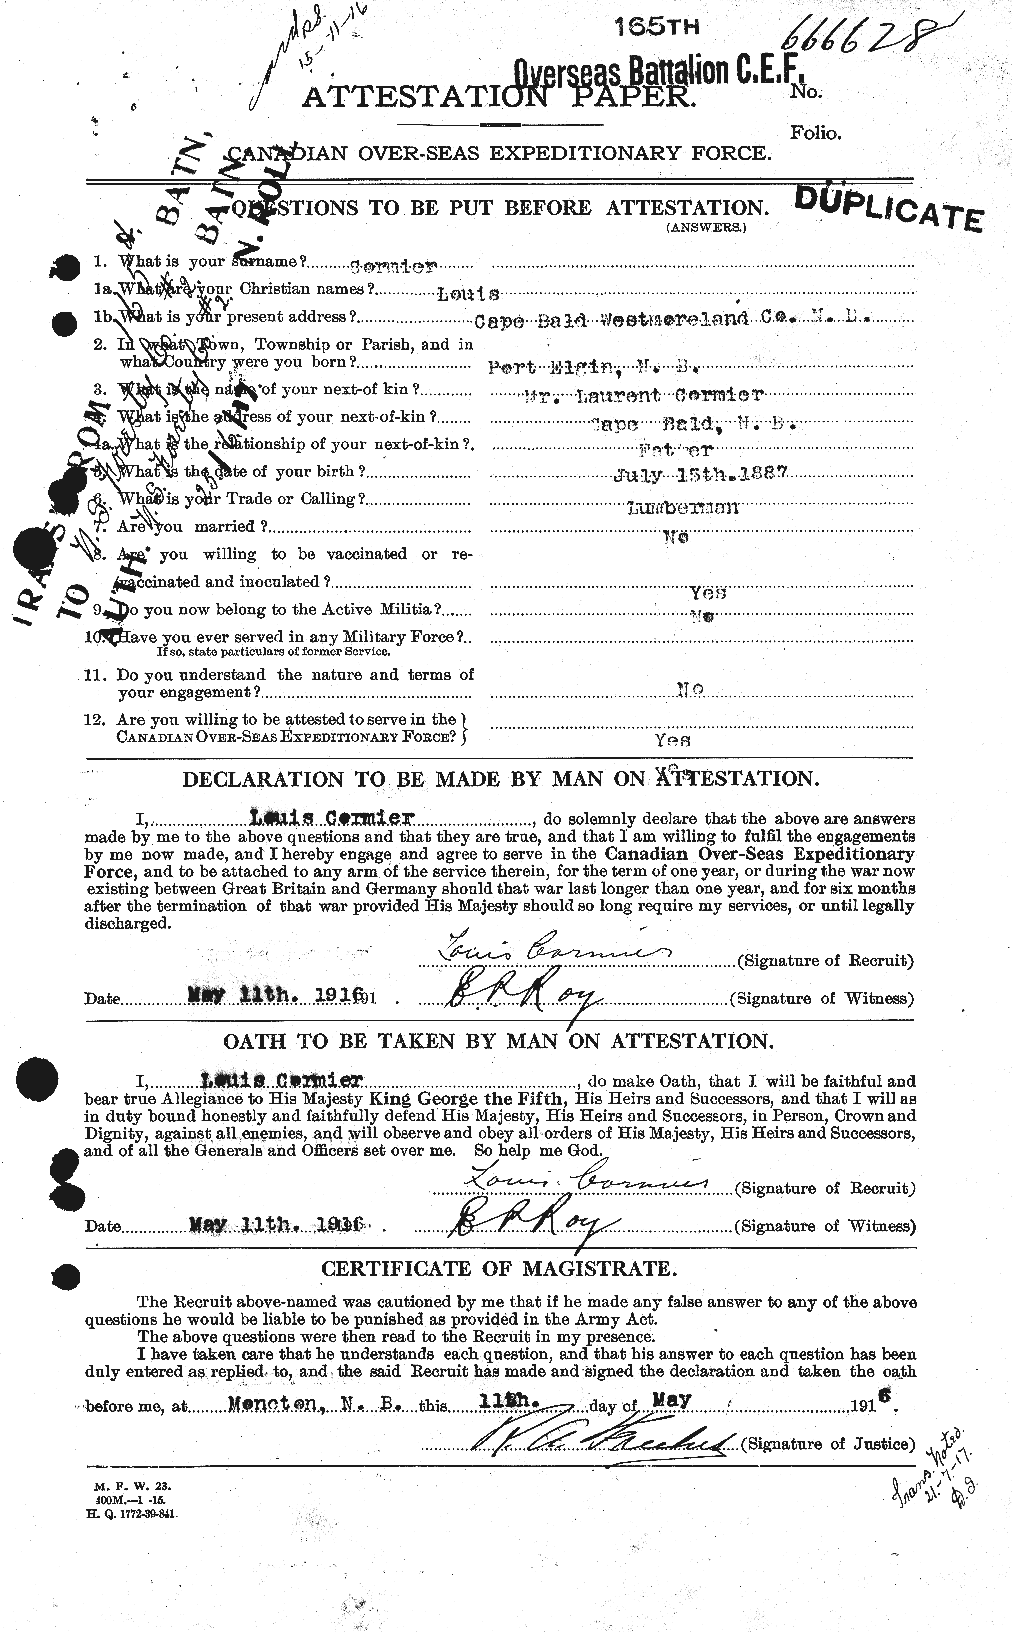 Personnel Records of the First World War - CEF 265051a